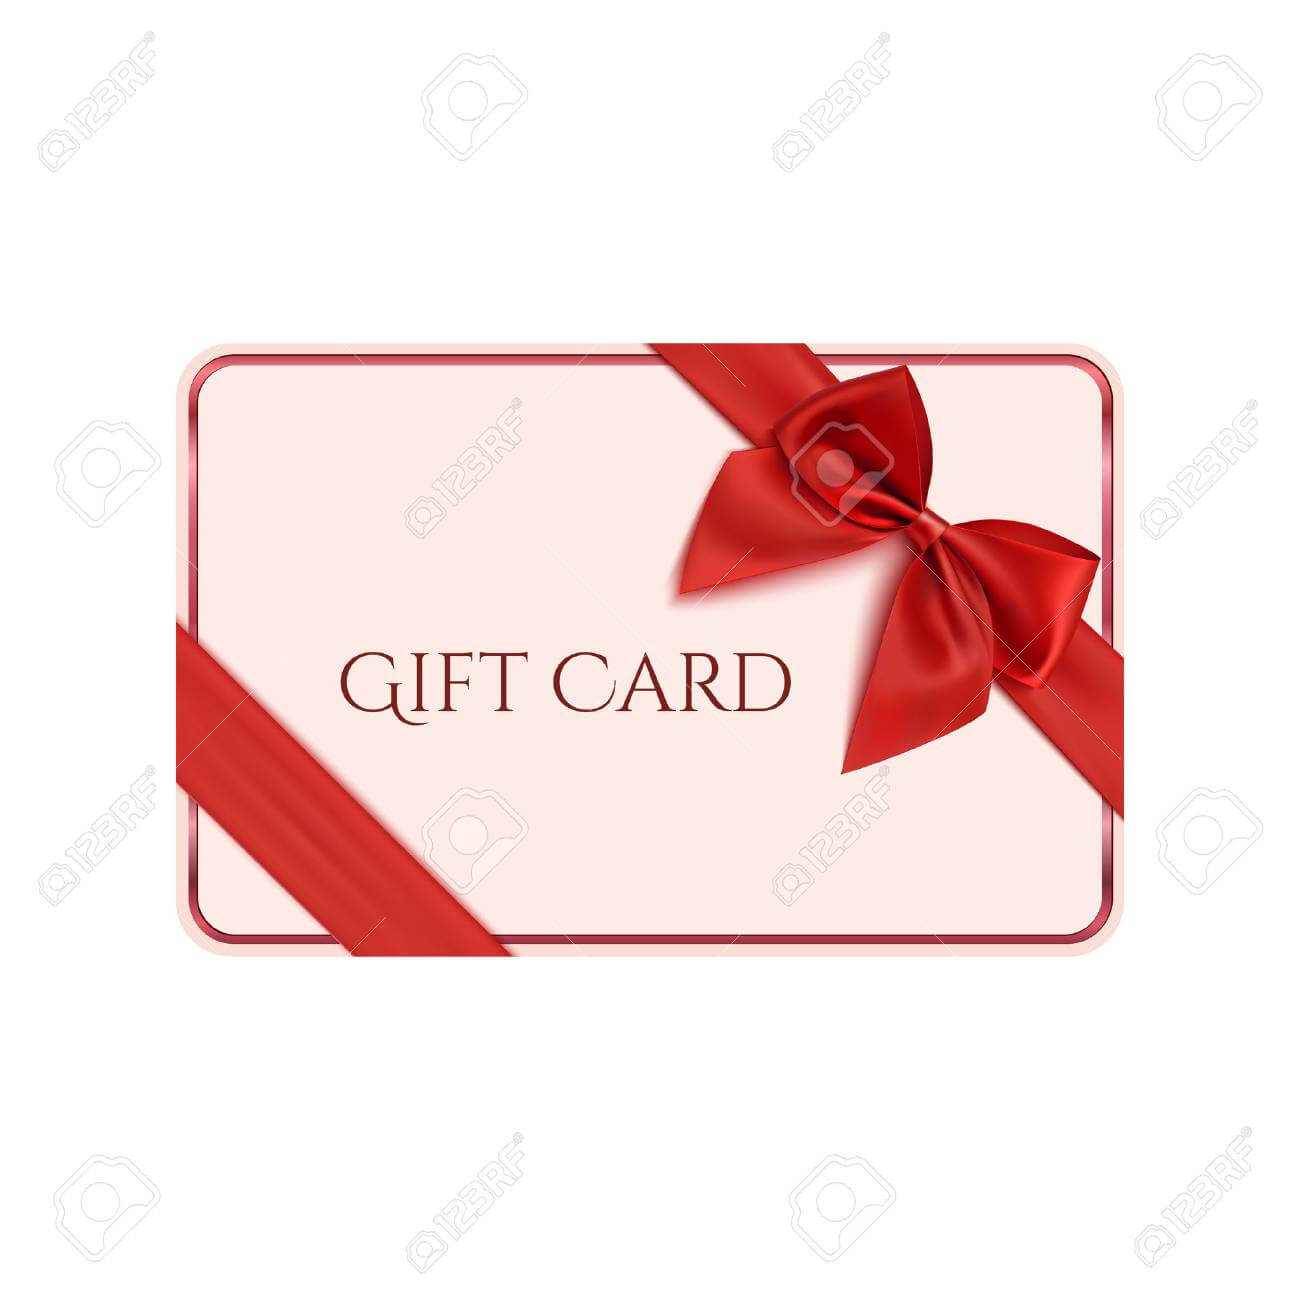 Gift Card Template With Red Ribbon And A Bow. Vector Illustration With Present Card Template